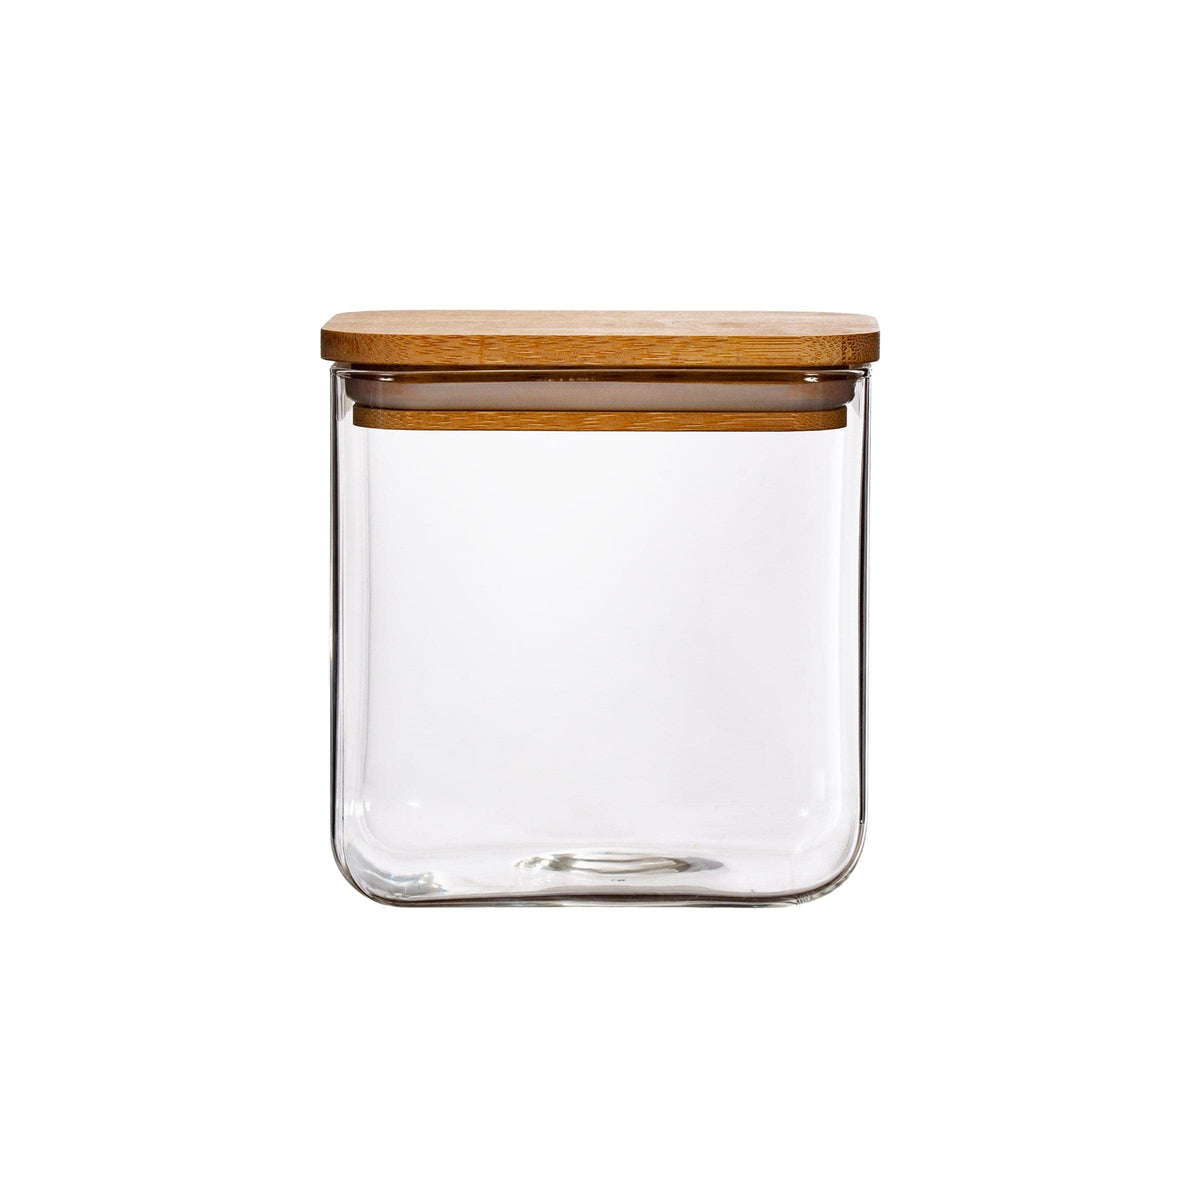 Sass & Belle Small Glass Storage Container